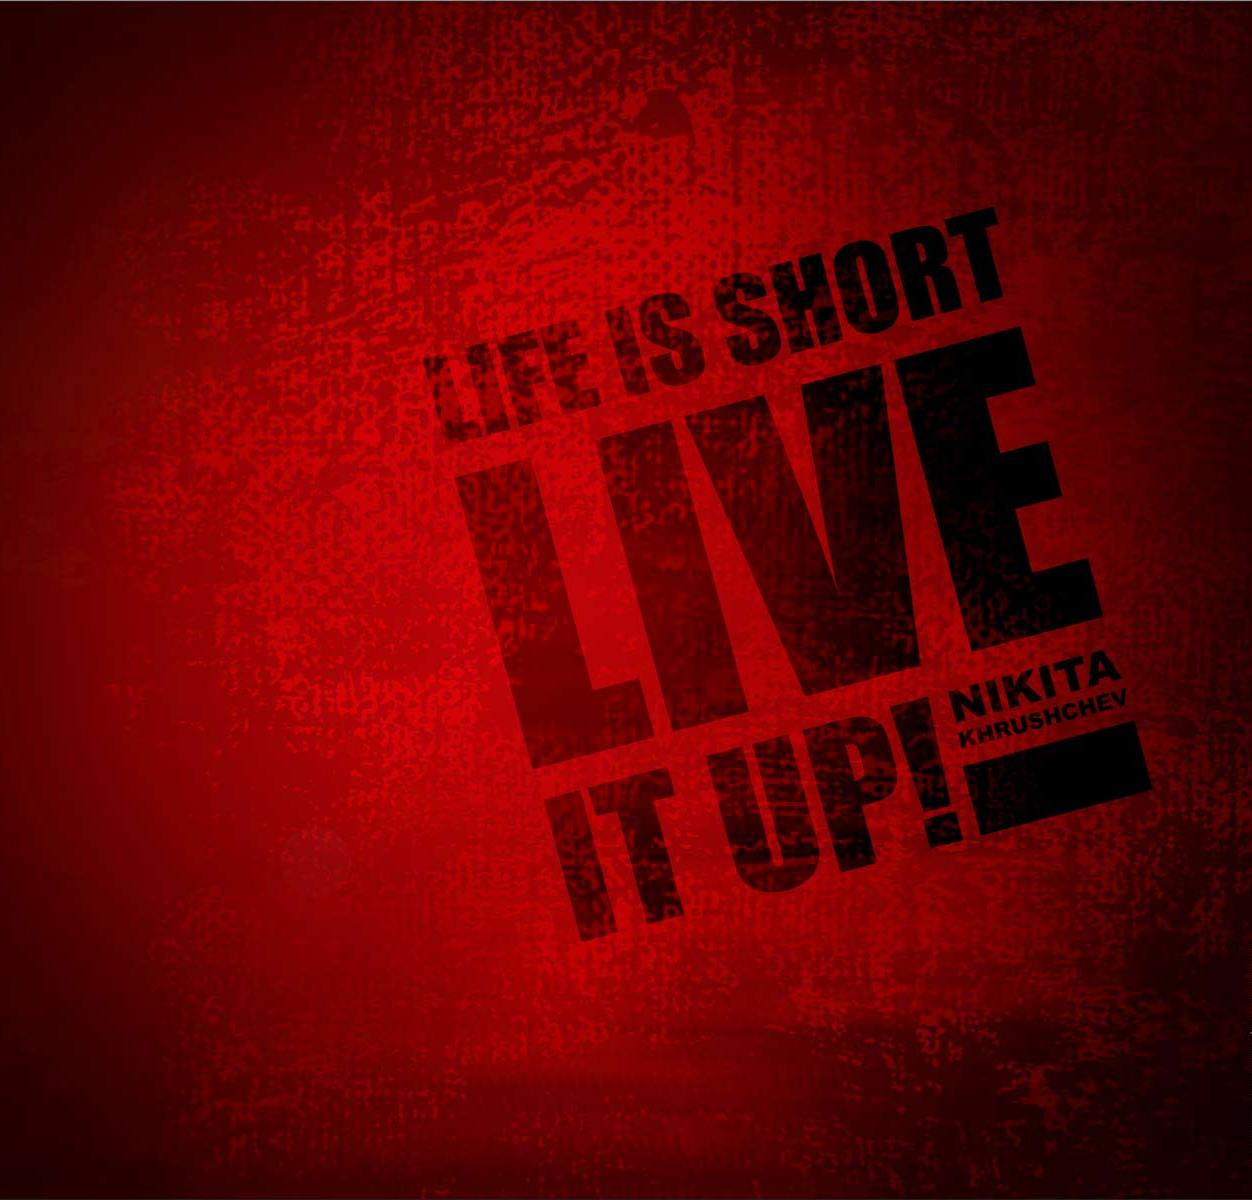 Wallpaper Short Quotes About Life | Quotes Image Wallpaper Photo